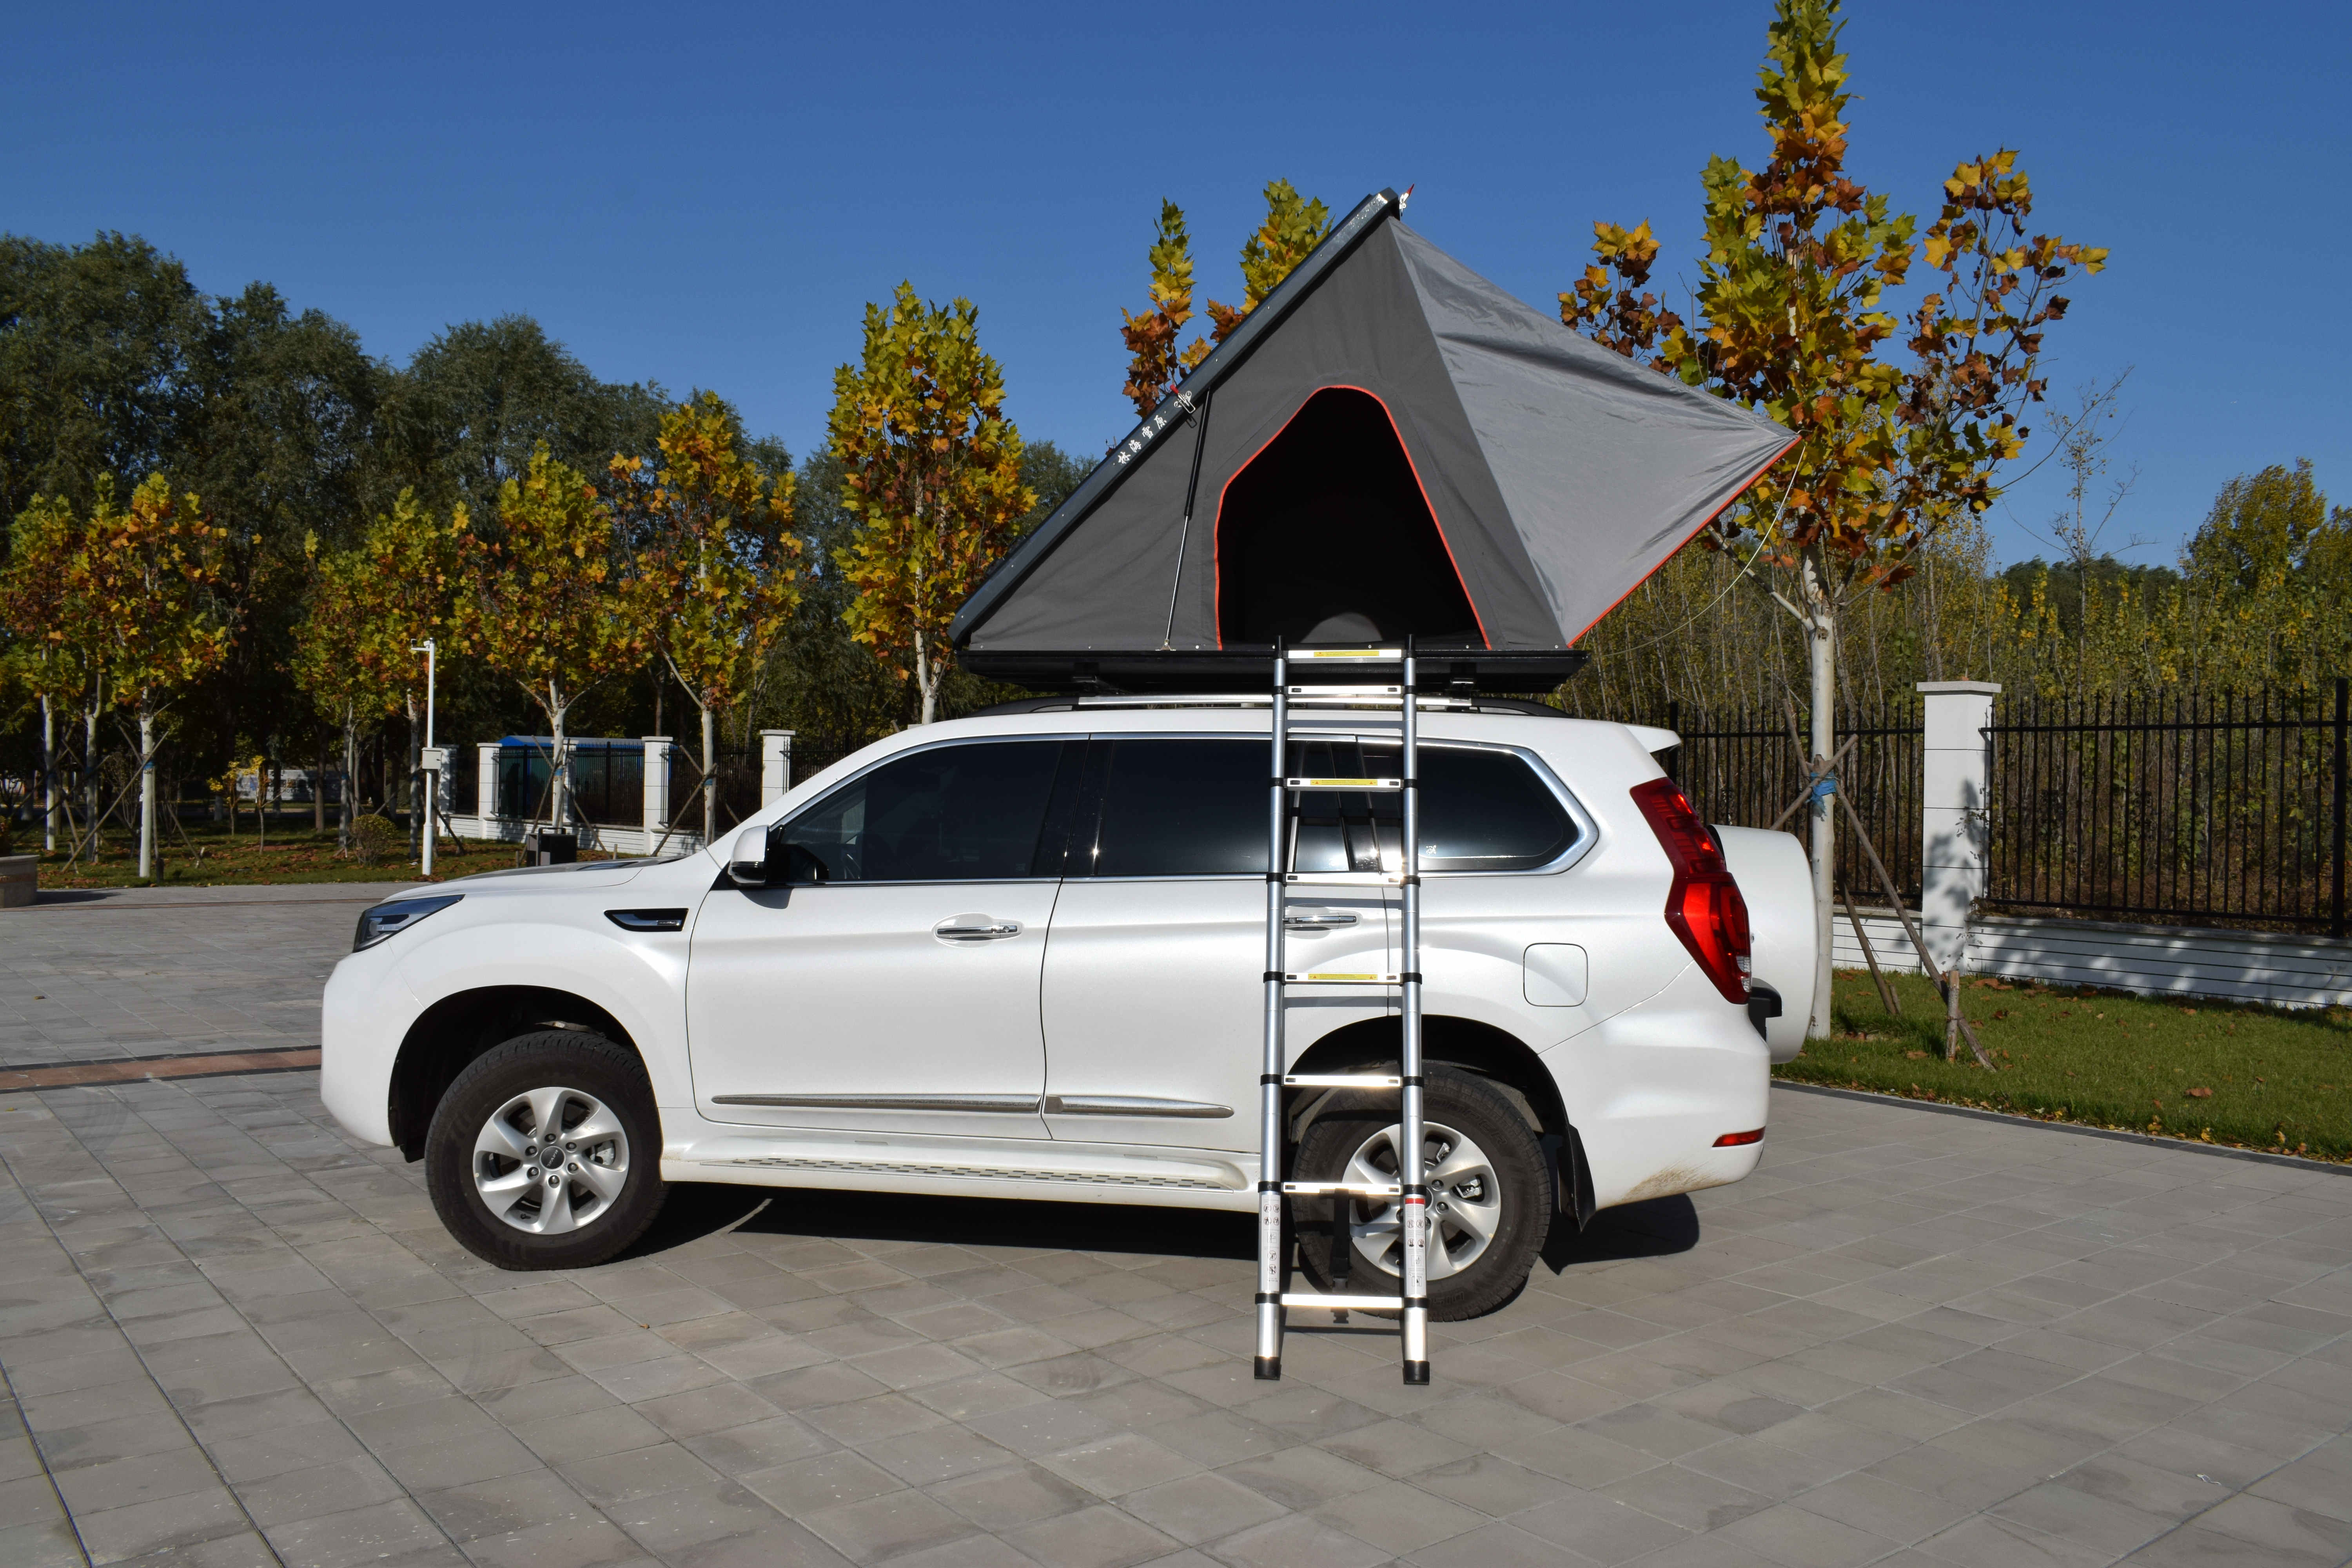 Are roof tents practical?